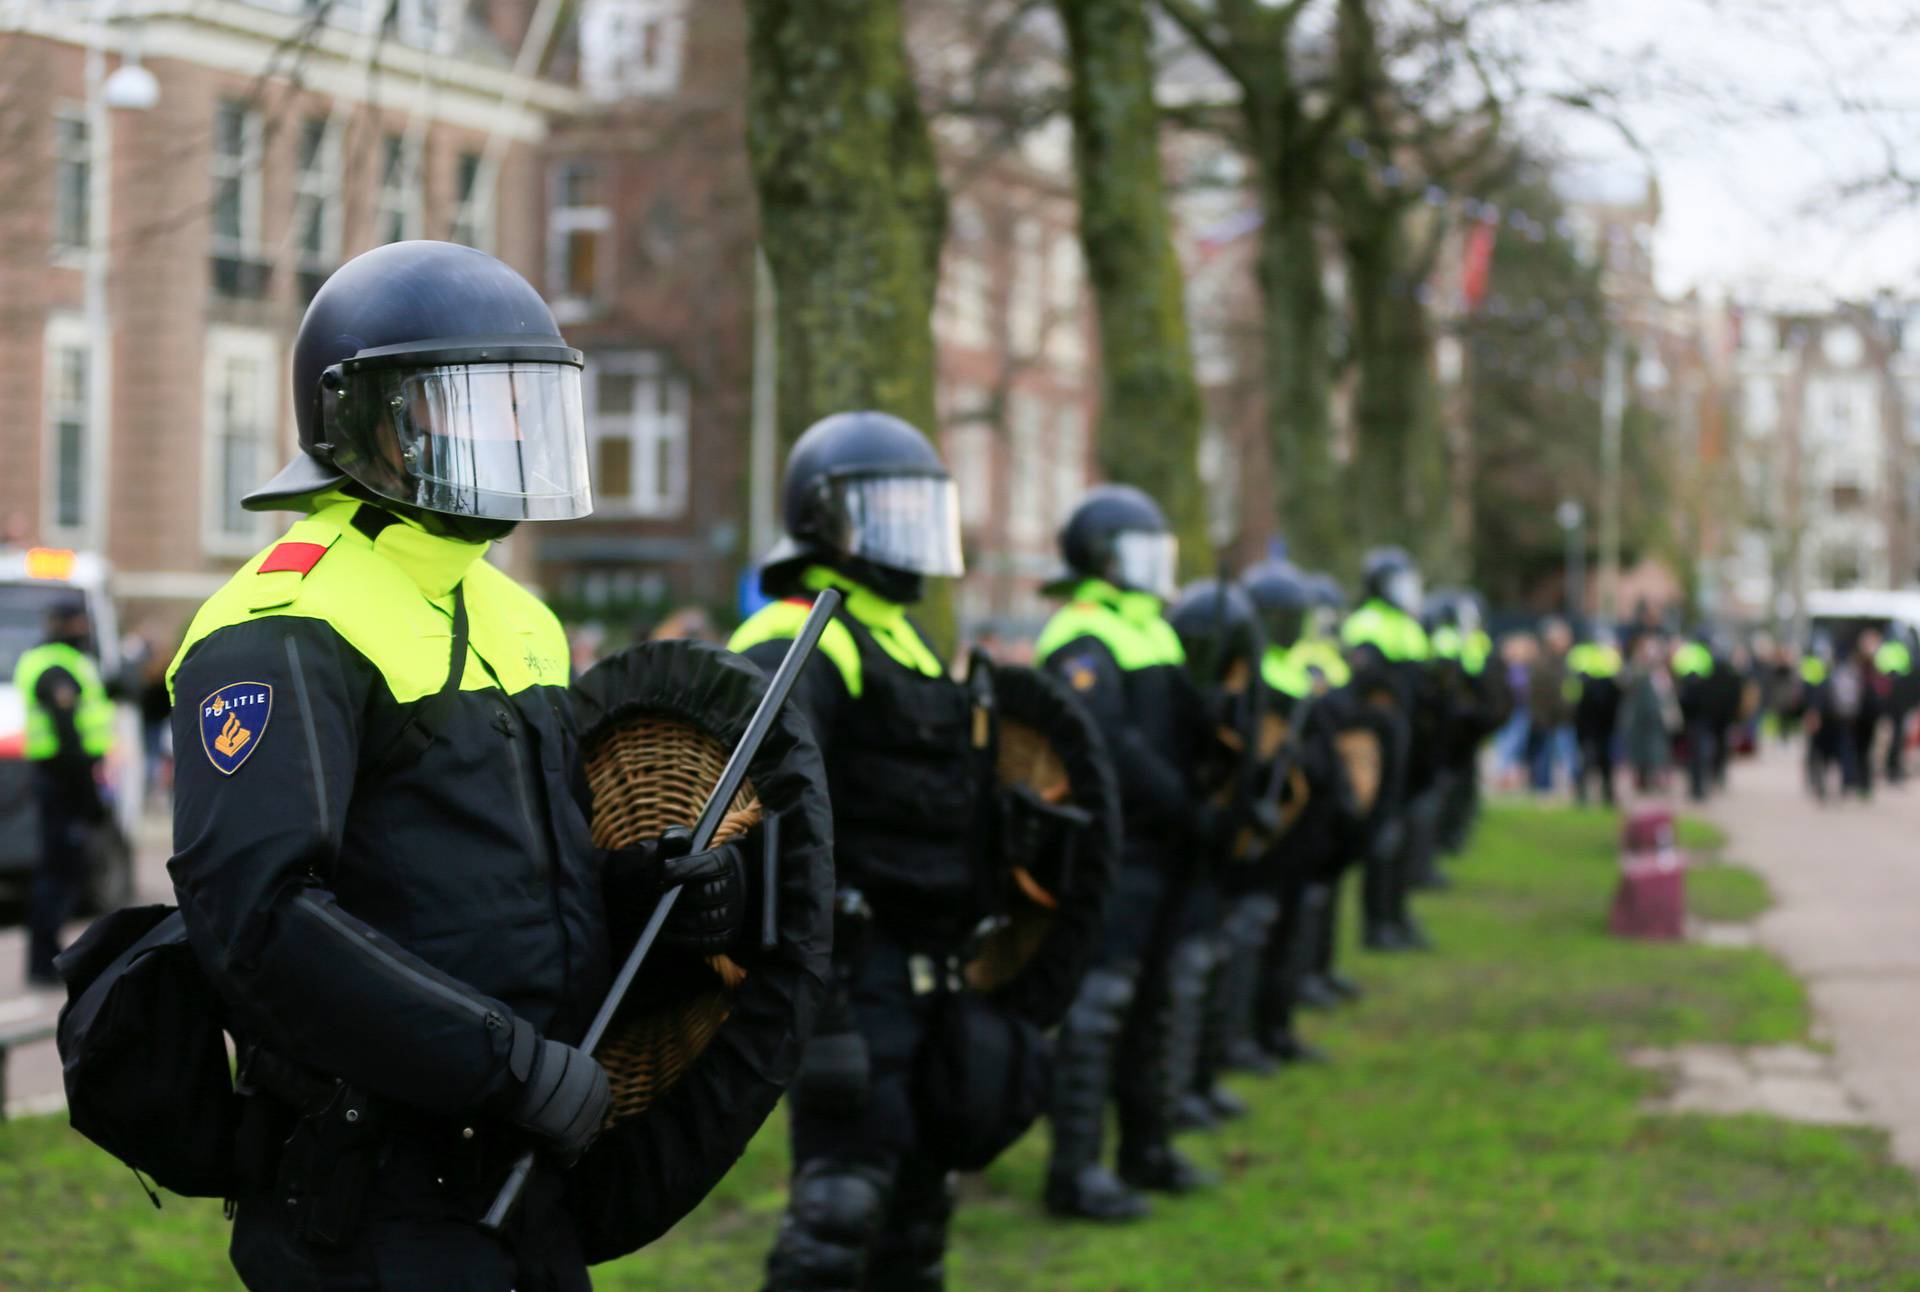 Protest against COVID-19 restrictions in Amsterdam